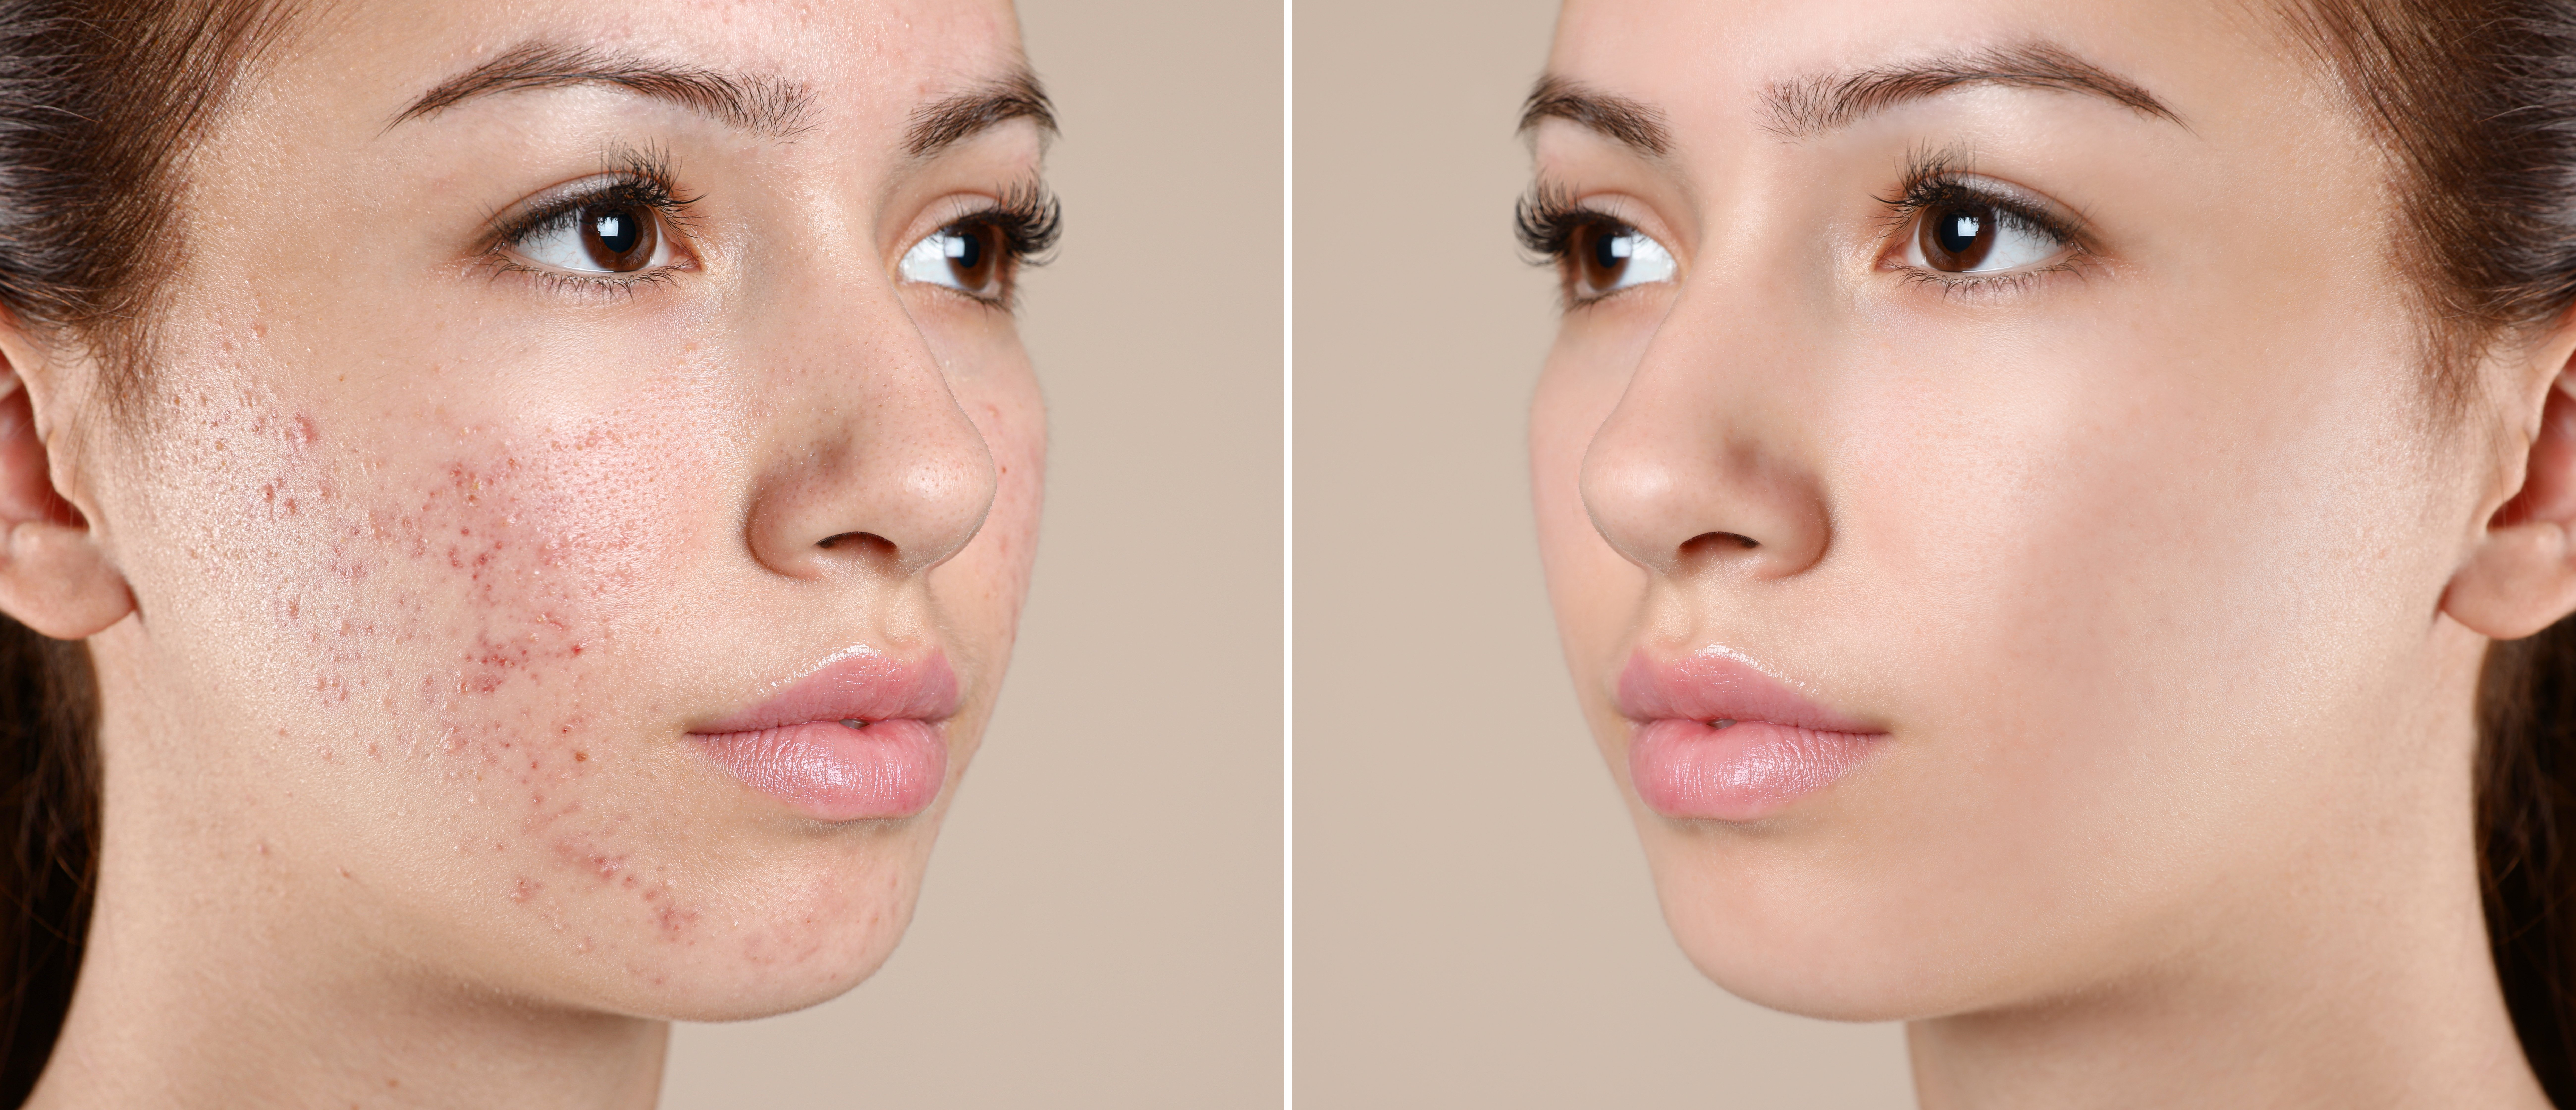 Woman before and after acne treatment | Shutterstock